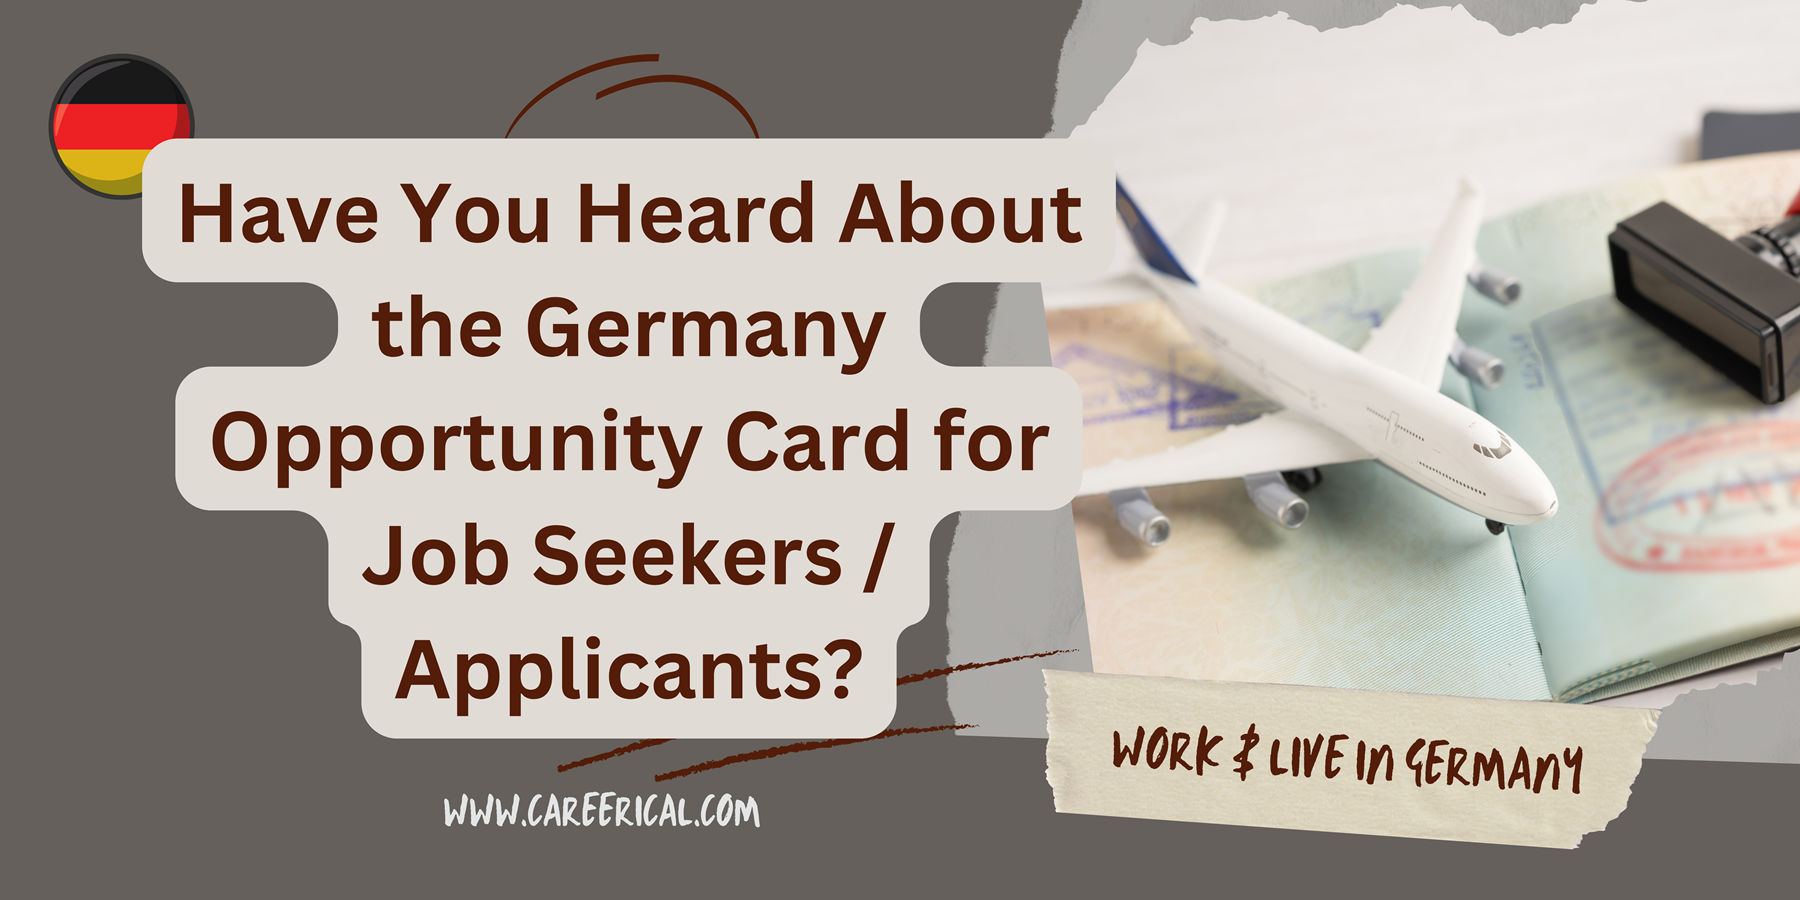 Have You Heard About the Germany Opportunity Card for Job Seekers Applicants